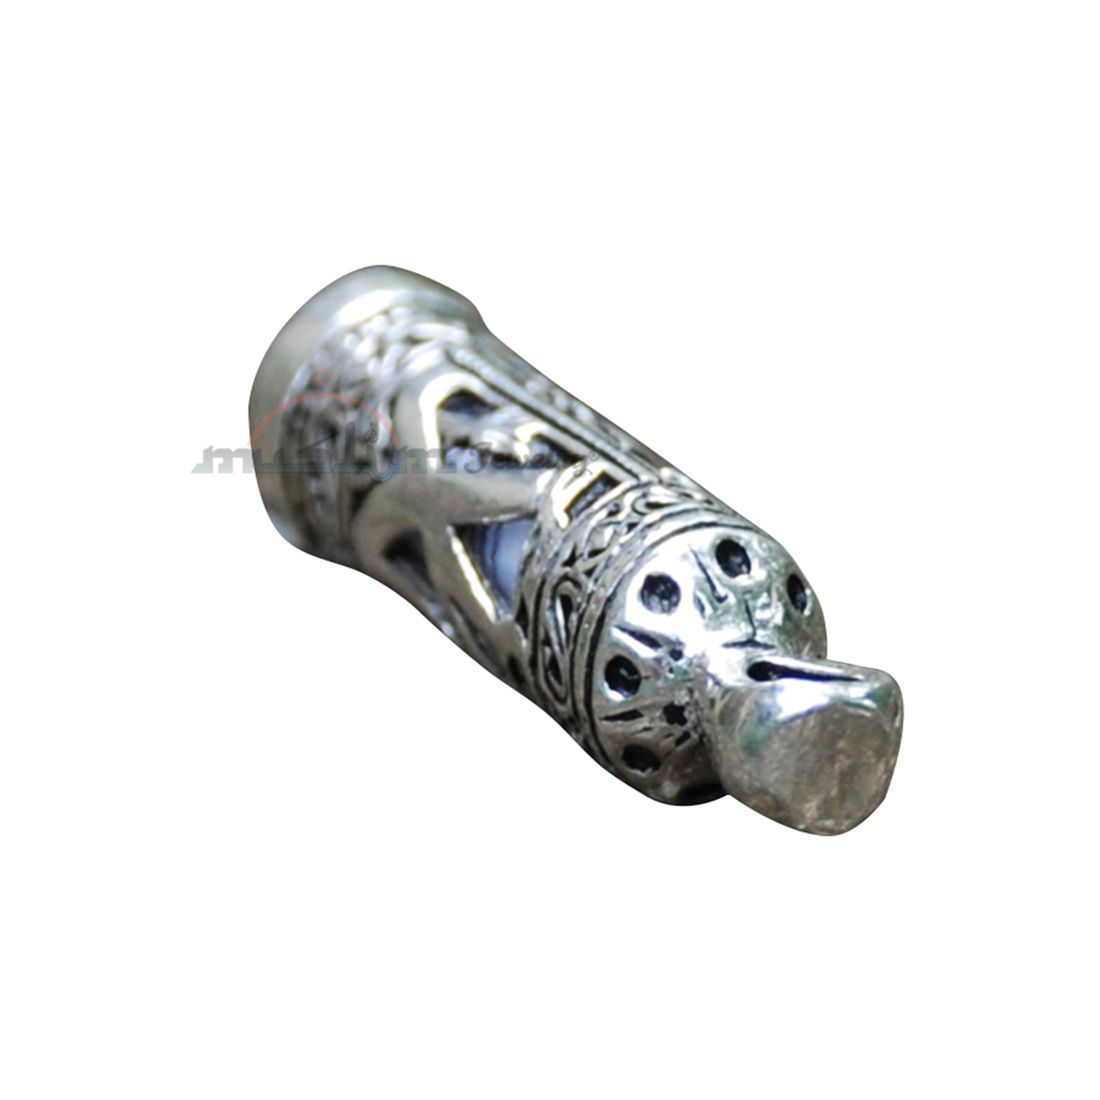 Glass Jawshan Muhammad Vial Enclosed in Sterling Silver Talisman Pendant